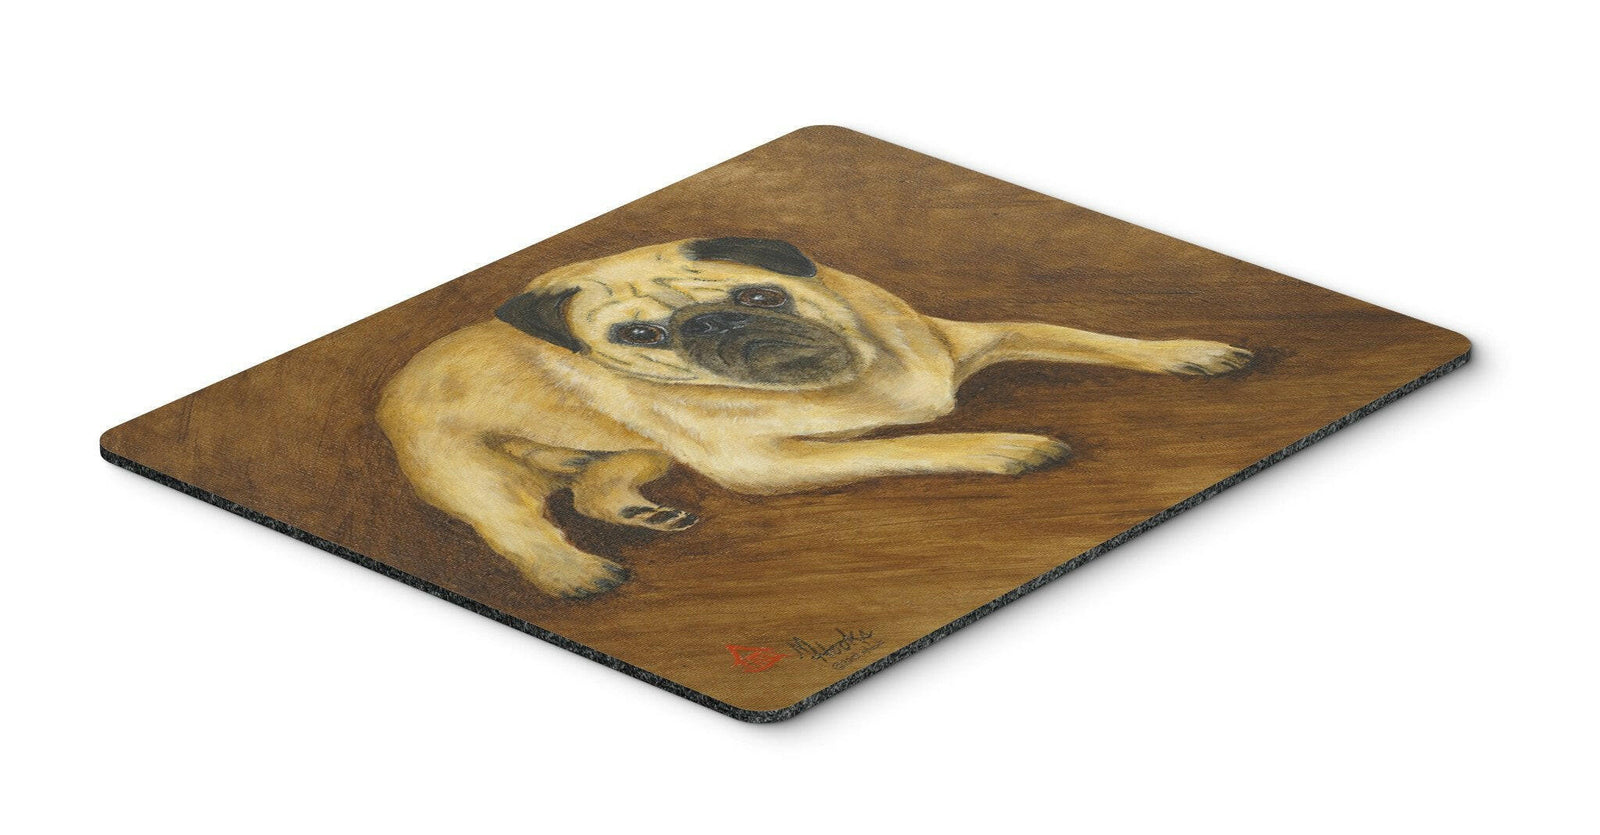 Fawn Pug Roscoe Mouse Pad, Hot Pad or Trivet MH1062MP by Caroline's Treasures